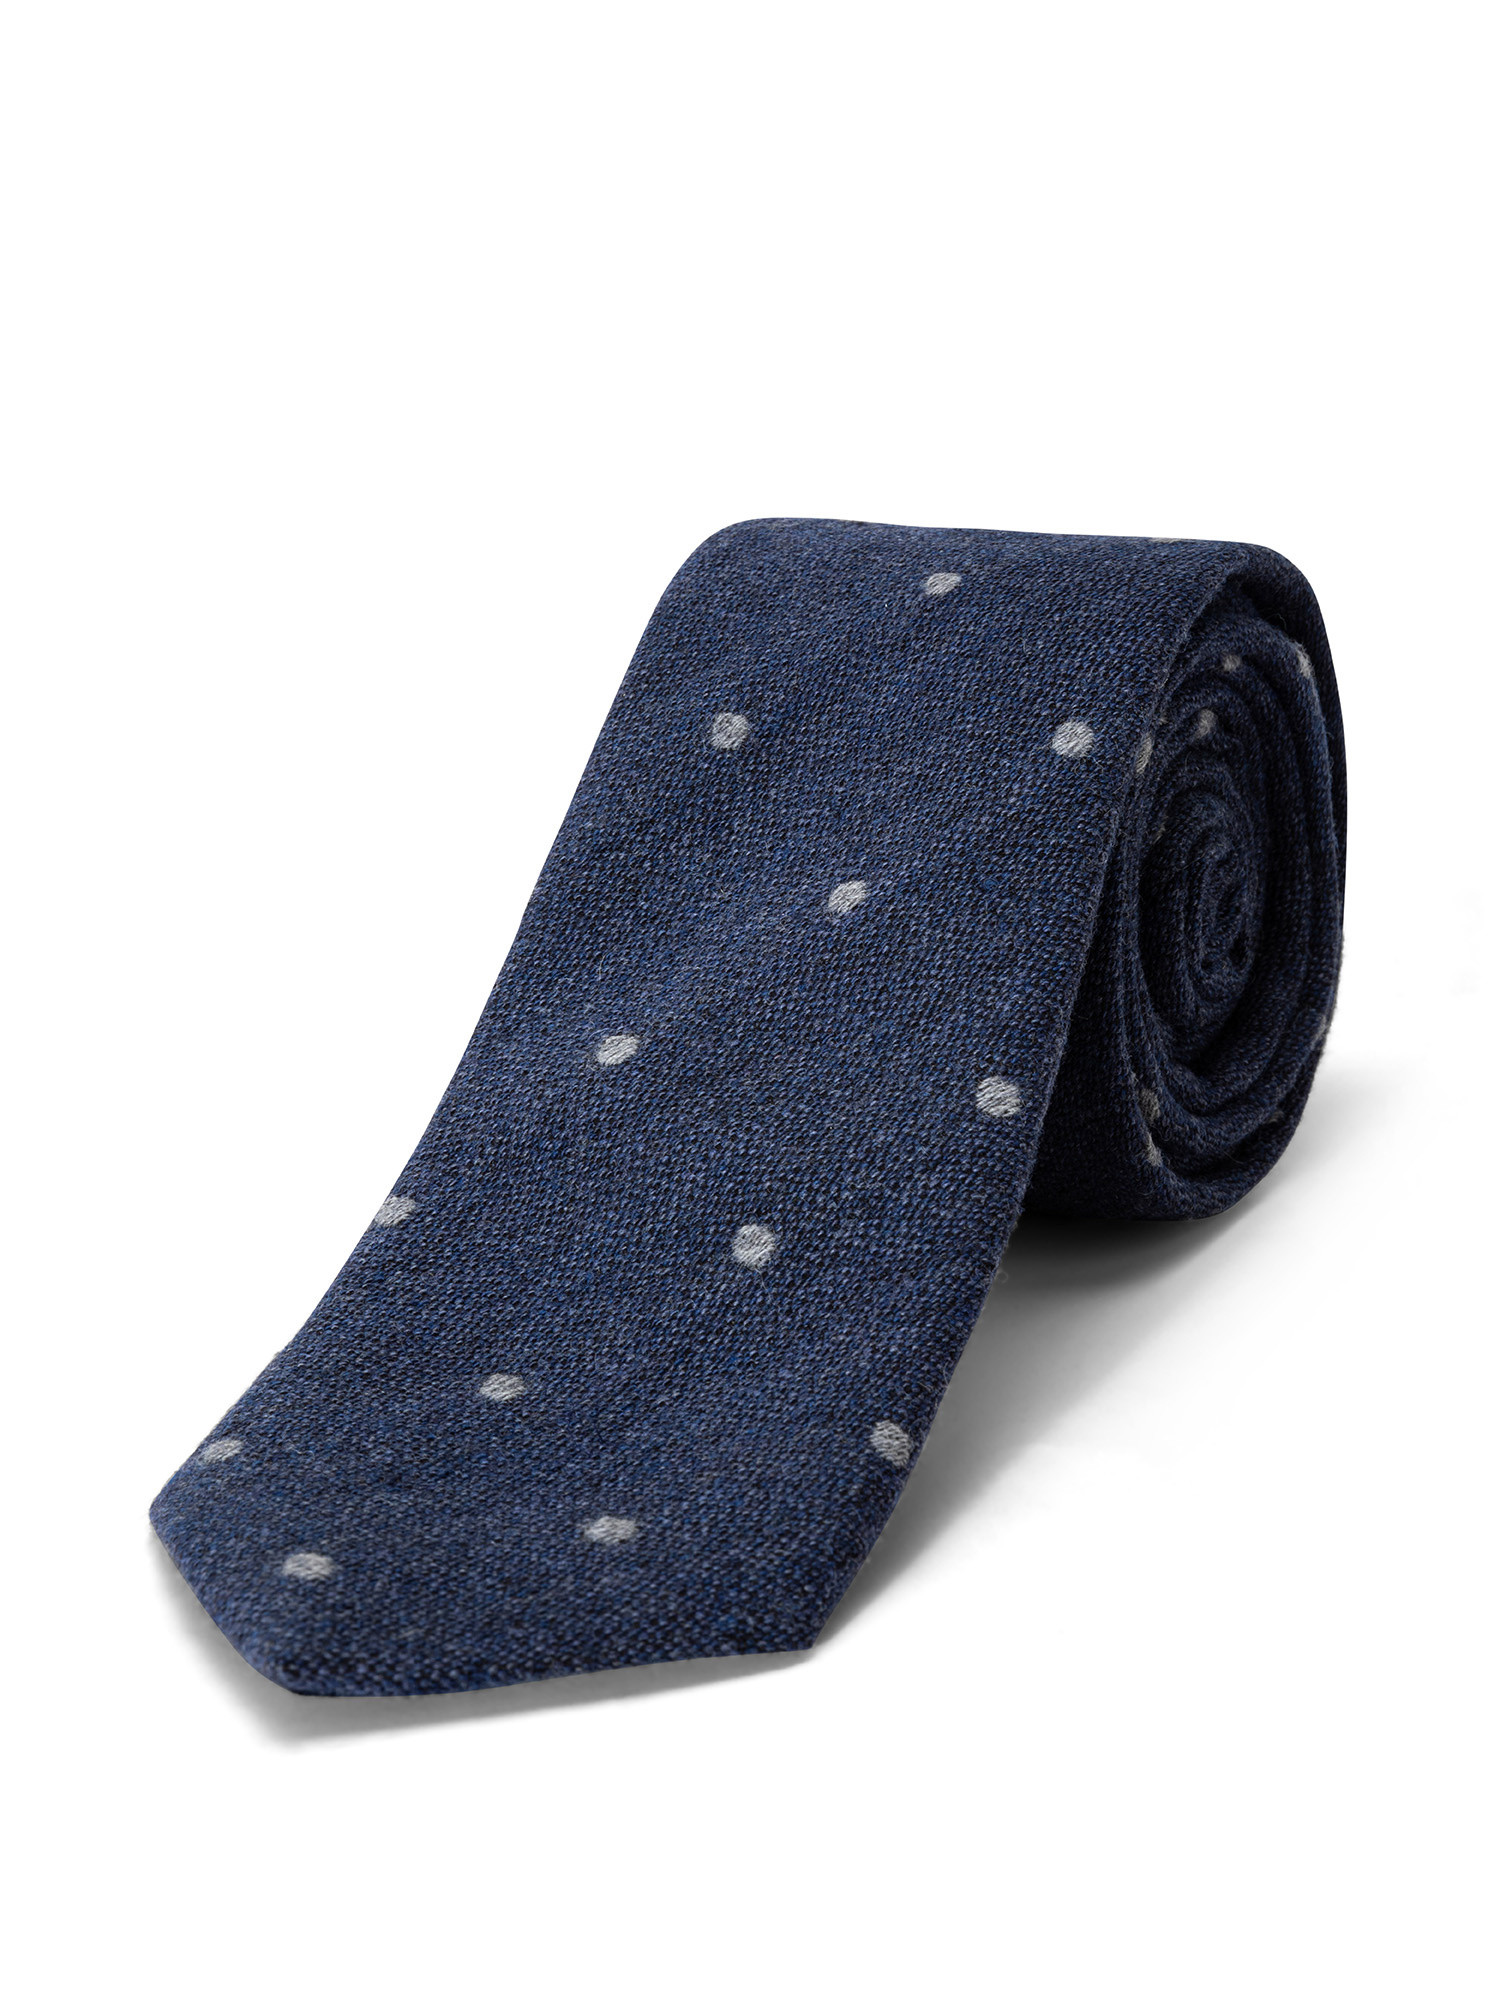 Luca D'Altieri - Patterned wool and silk tie, Blue 1, large image number 0